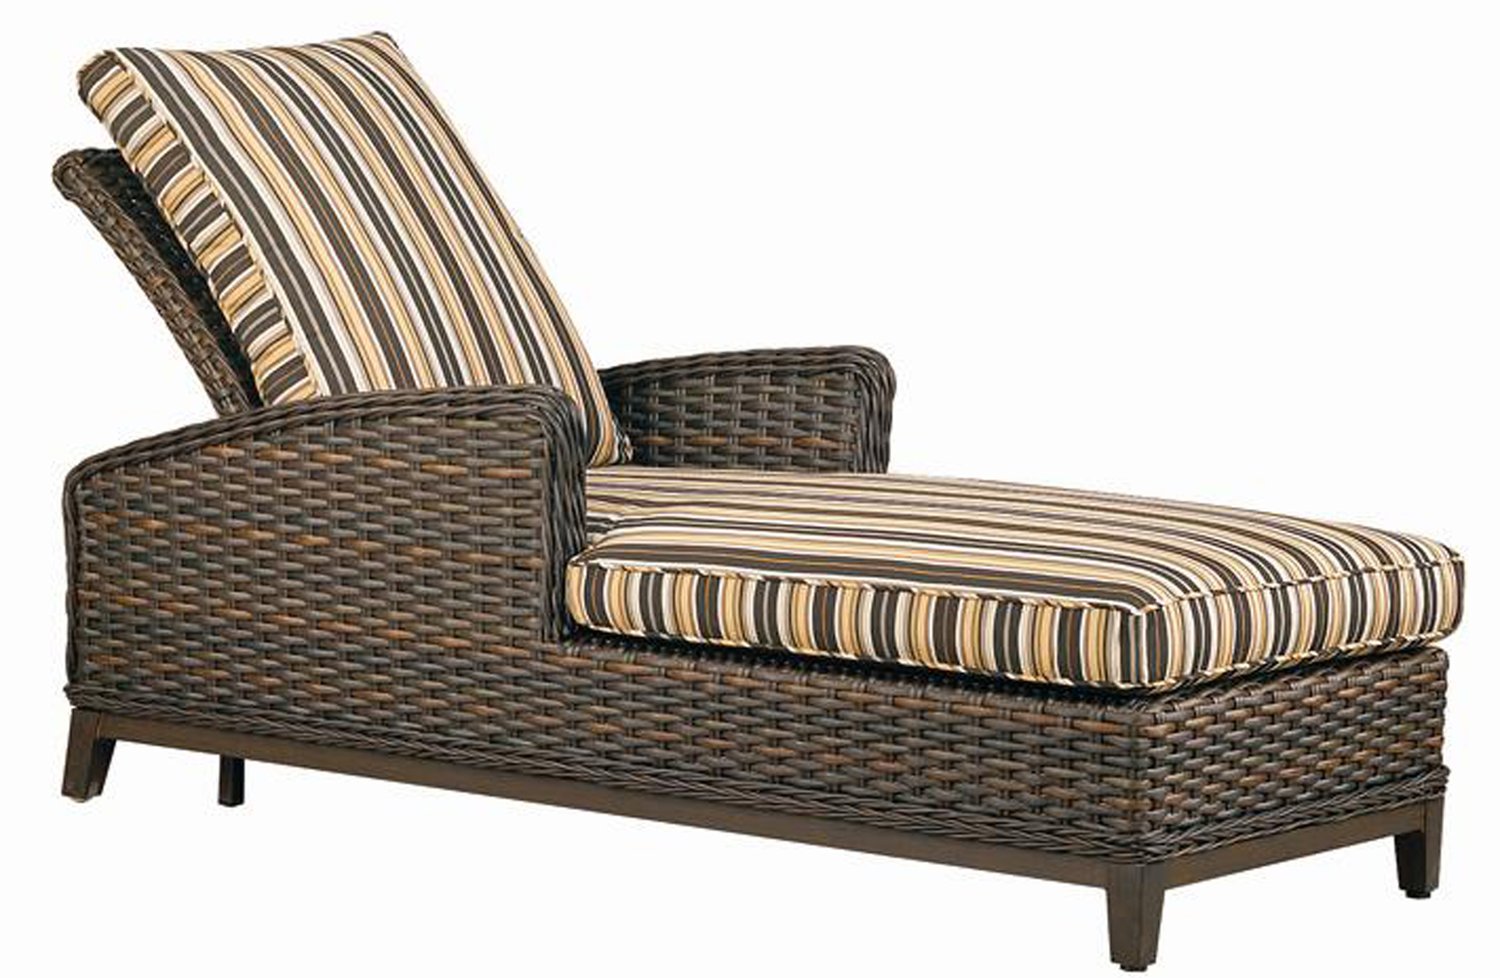 Catalina Single Adjustable Chaise by Patio Renaissance